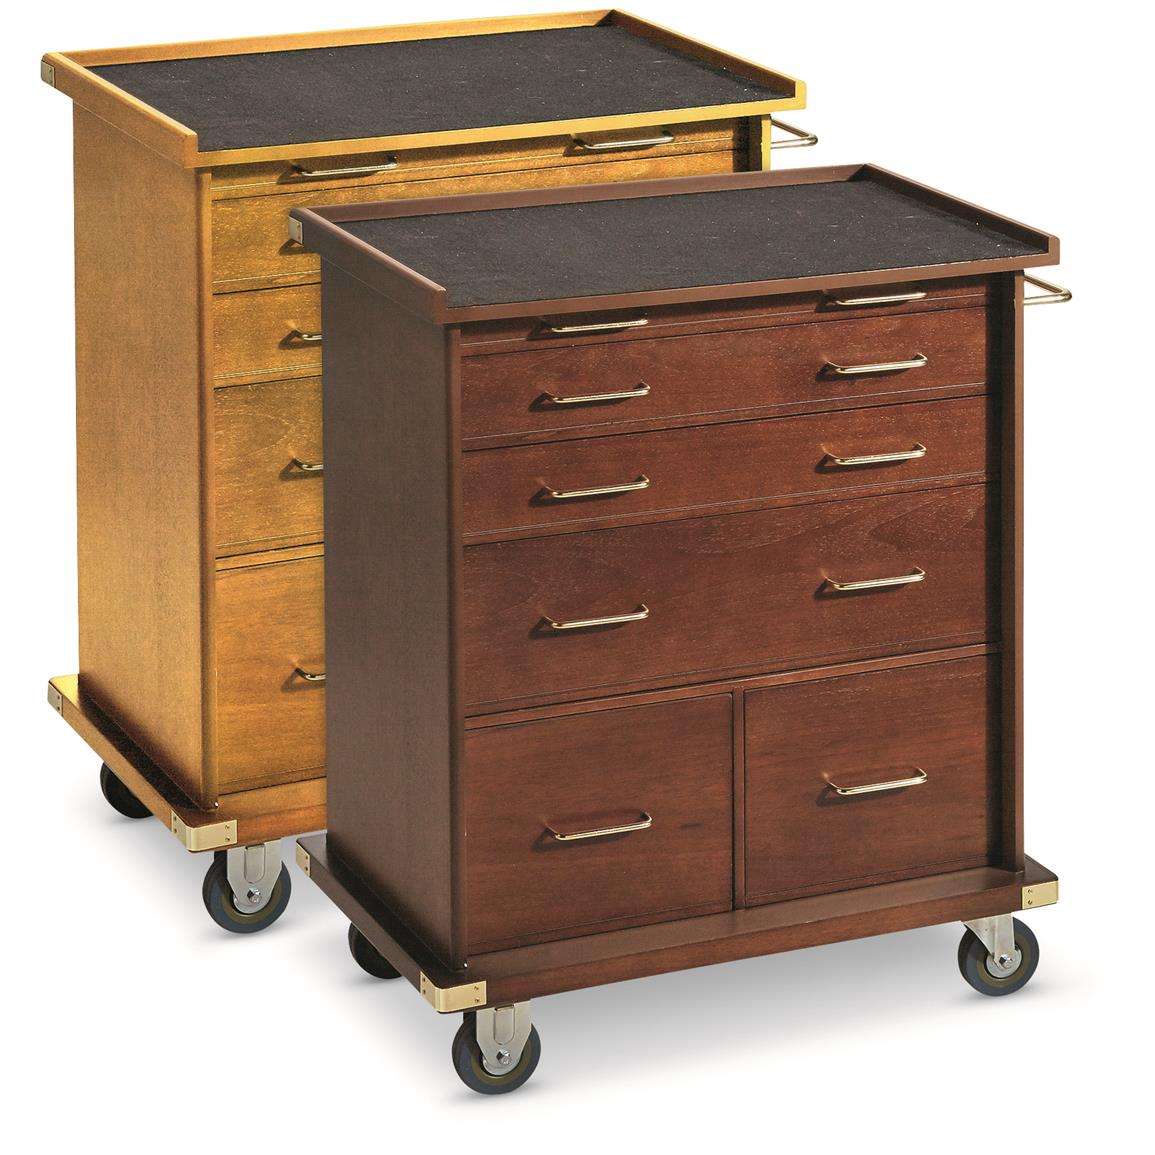 CASTLECREEK Rolling Storage Cabinet - 667207, Coins, Collectibles